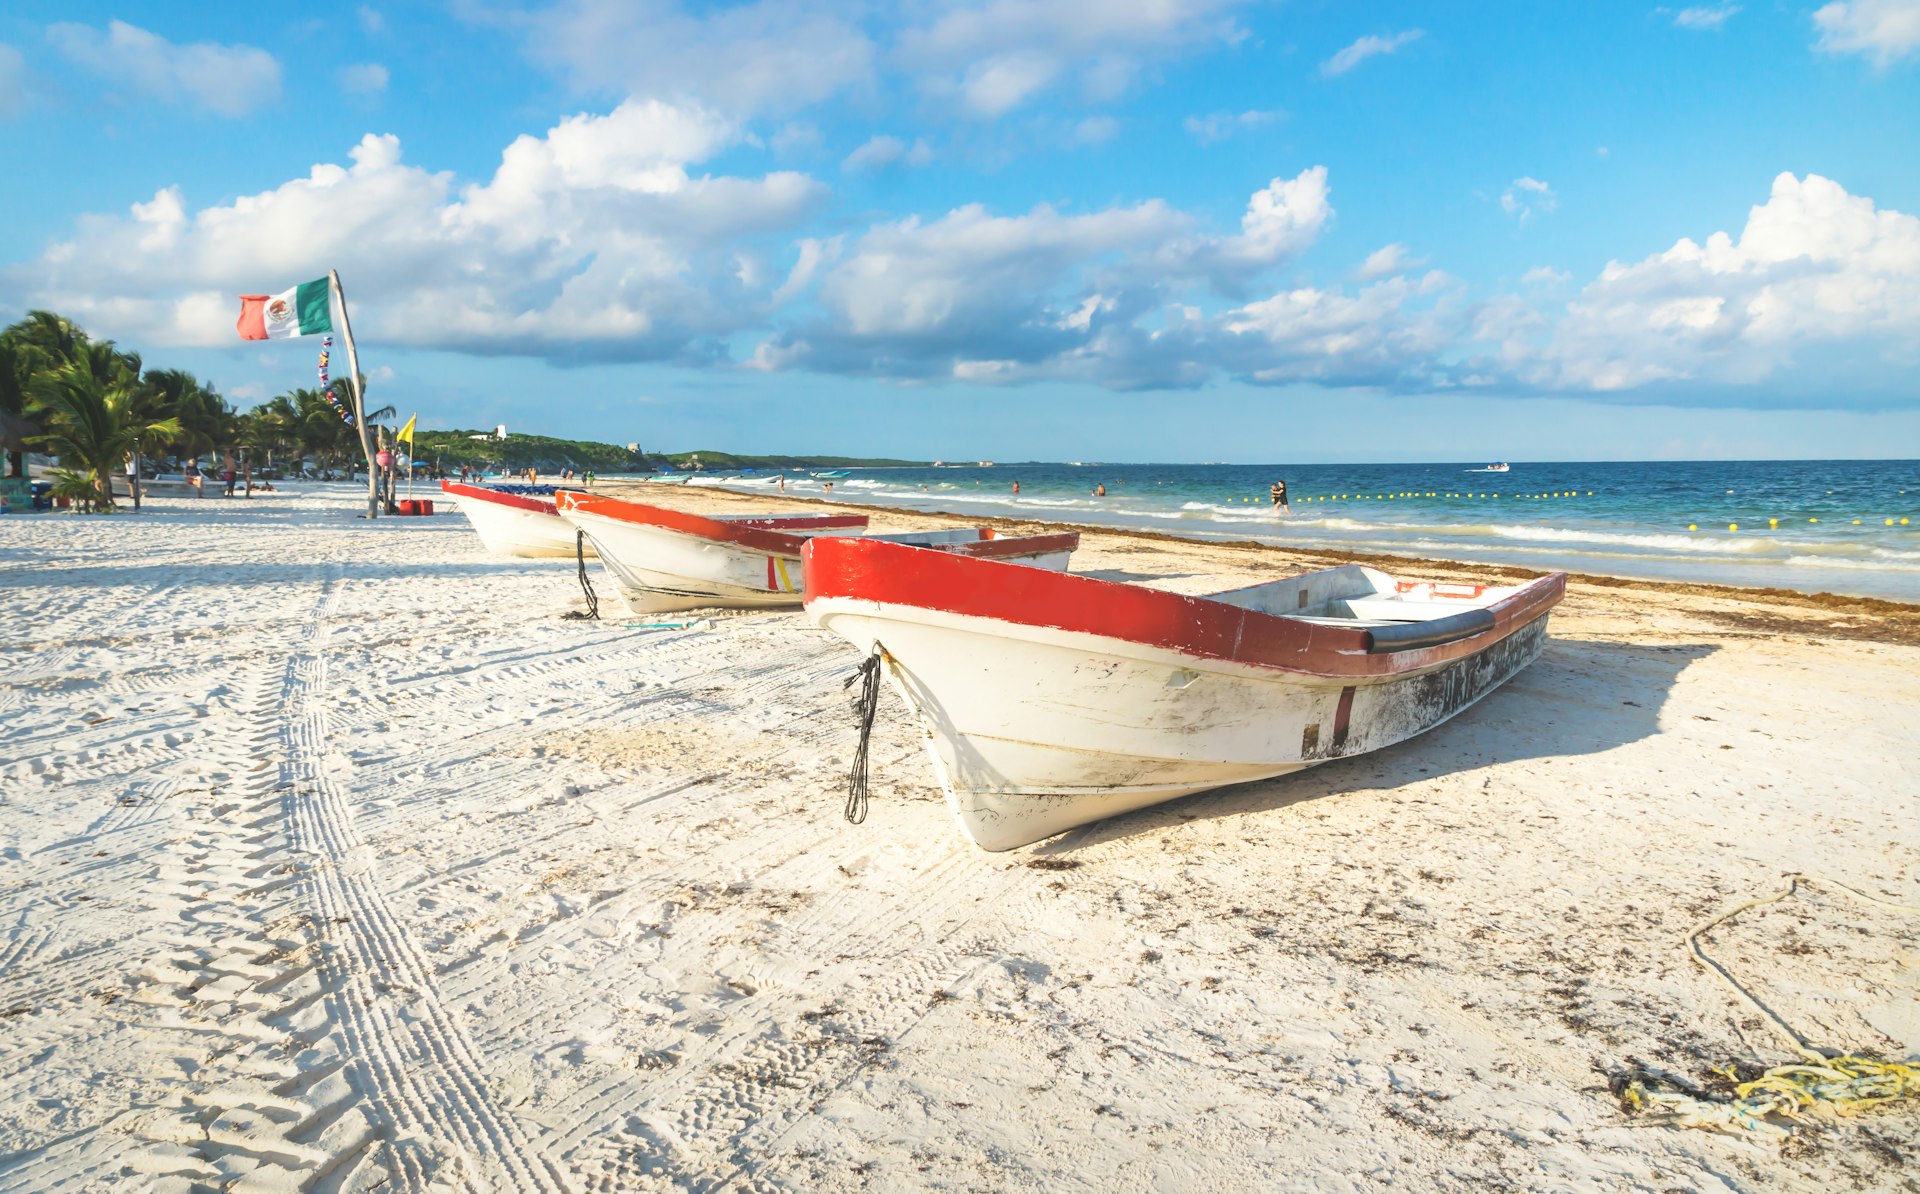 Boats at Playa Pescadores with blue sky and cloudscape